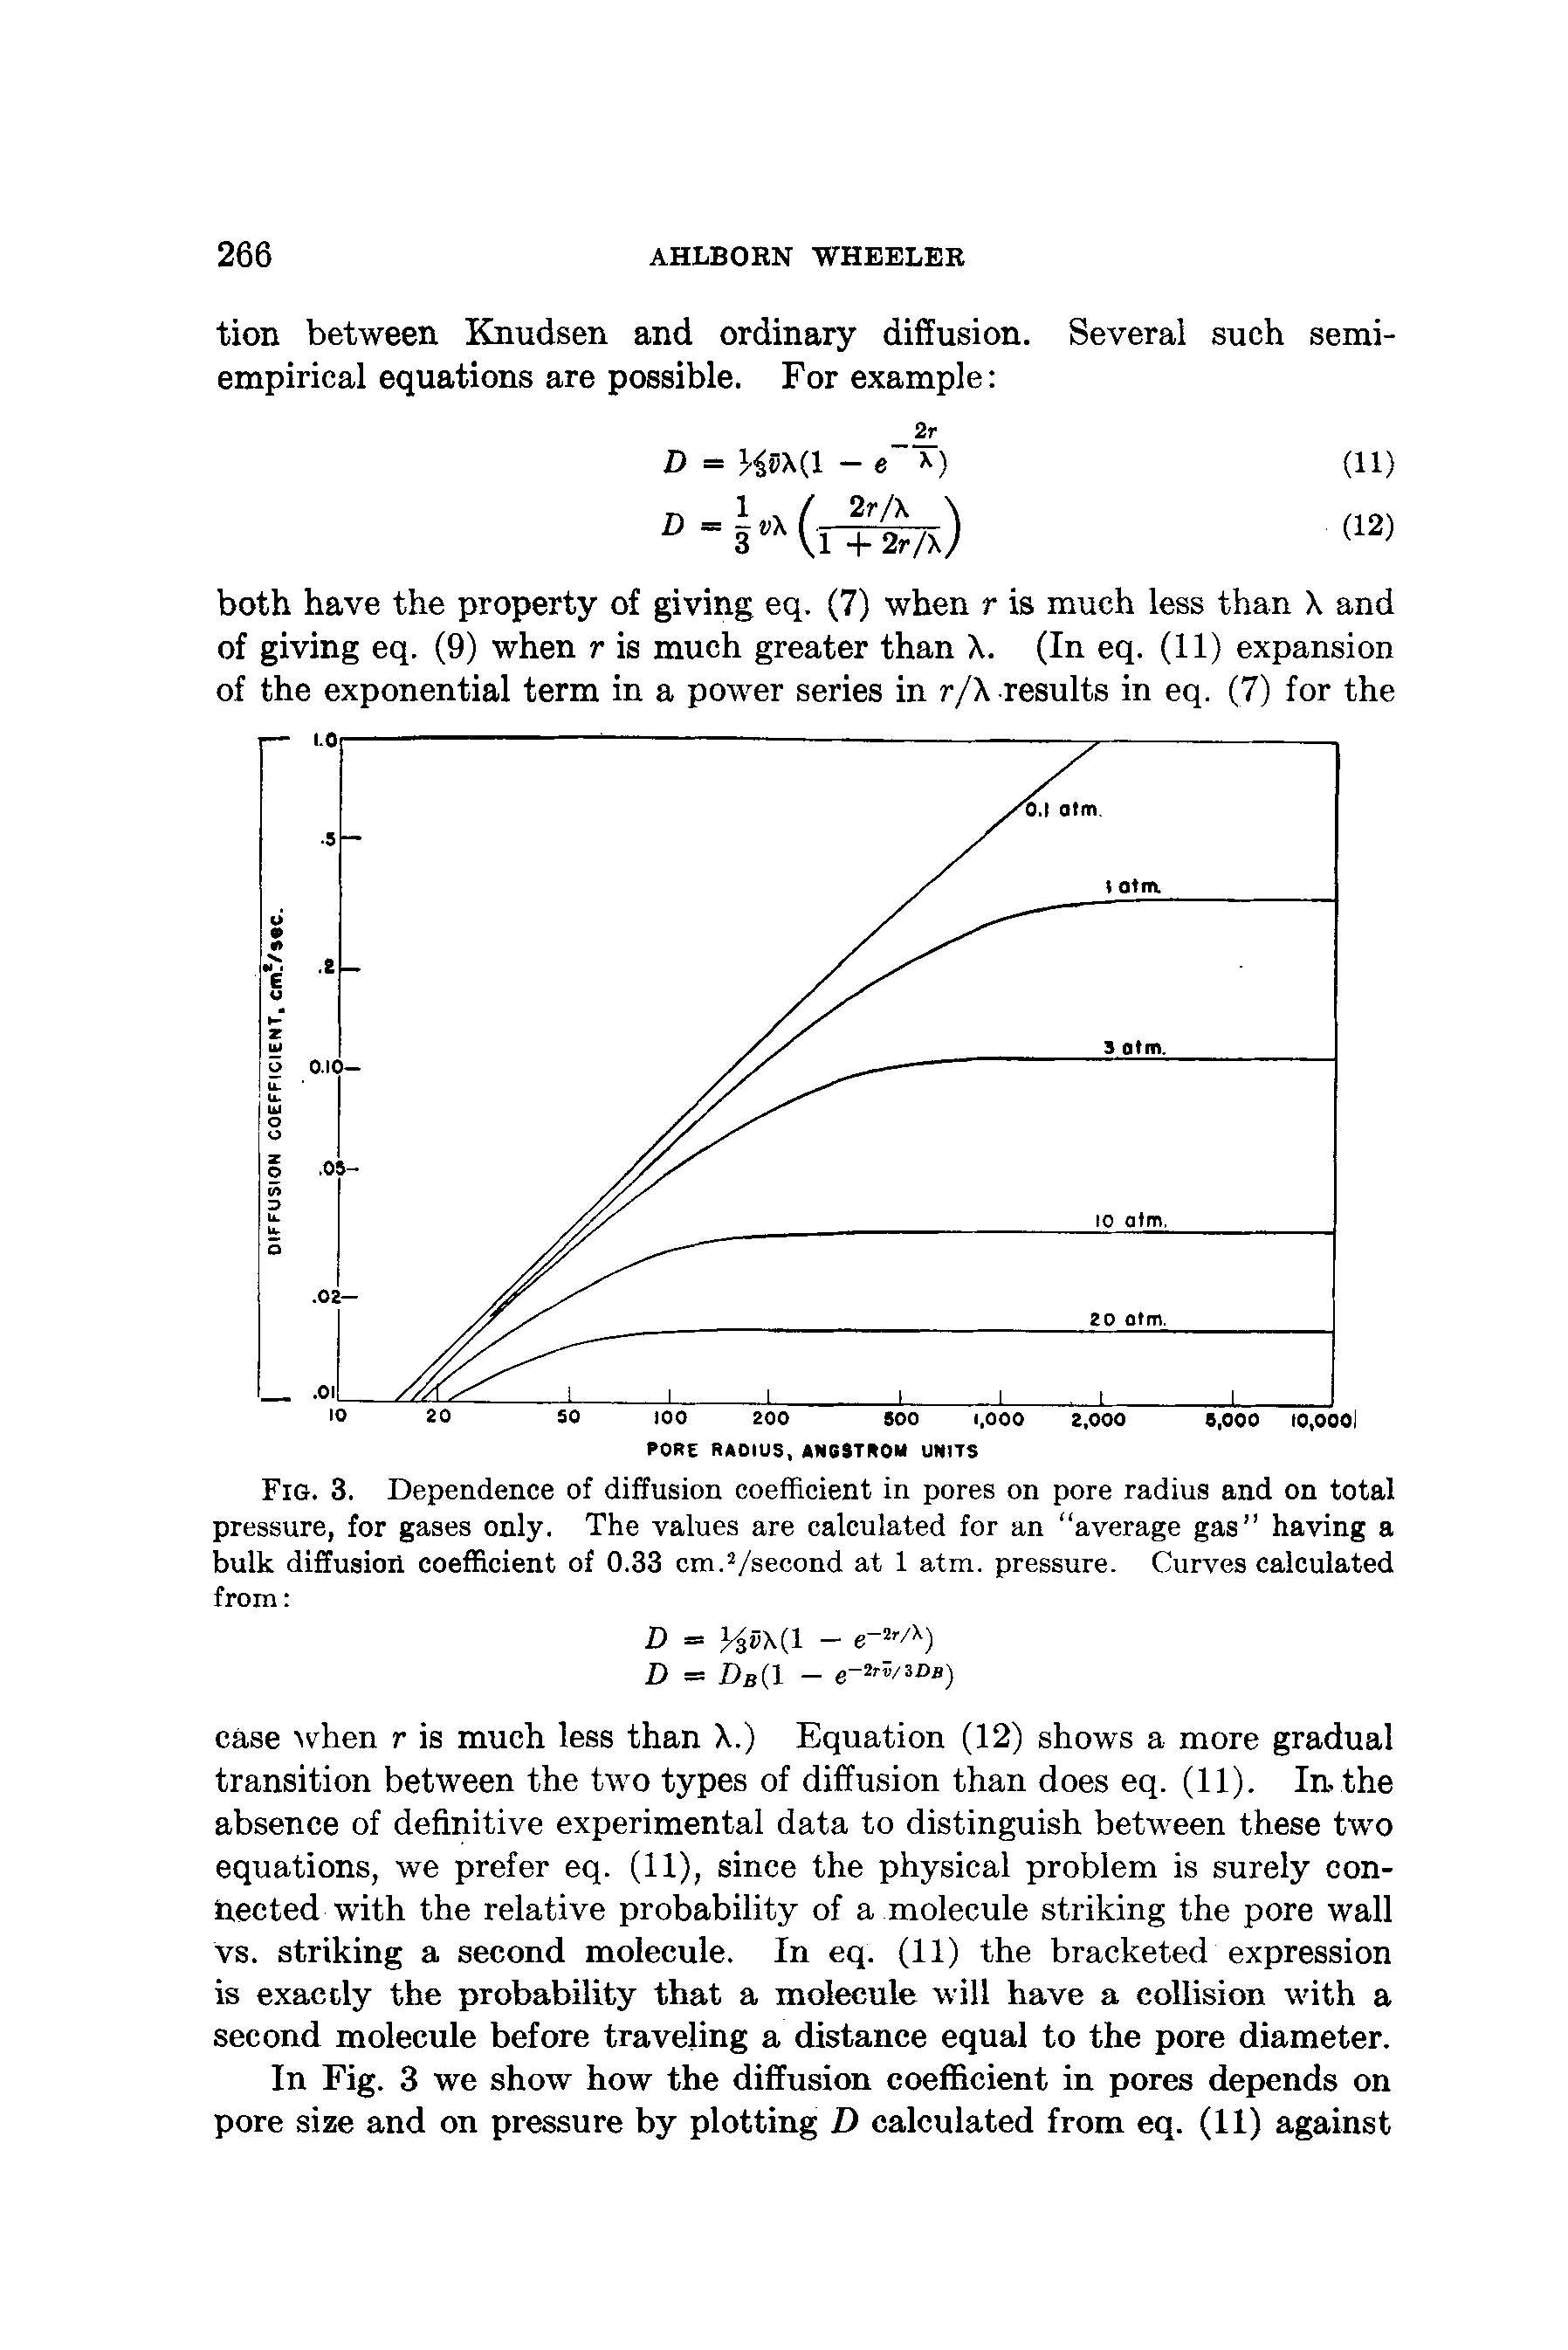 Fig. 3. Dependence of diffusion coefficient in pores on pore radius and on total pressure, for gases only. The values are calculated for an average gas having a bulk diffusion coefficient of 0.33 cm. /second at 1 atm. pressure. Curves calculated from ...